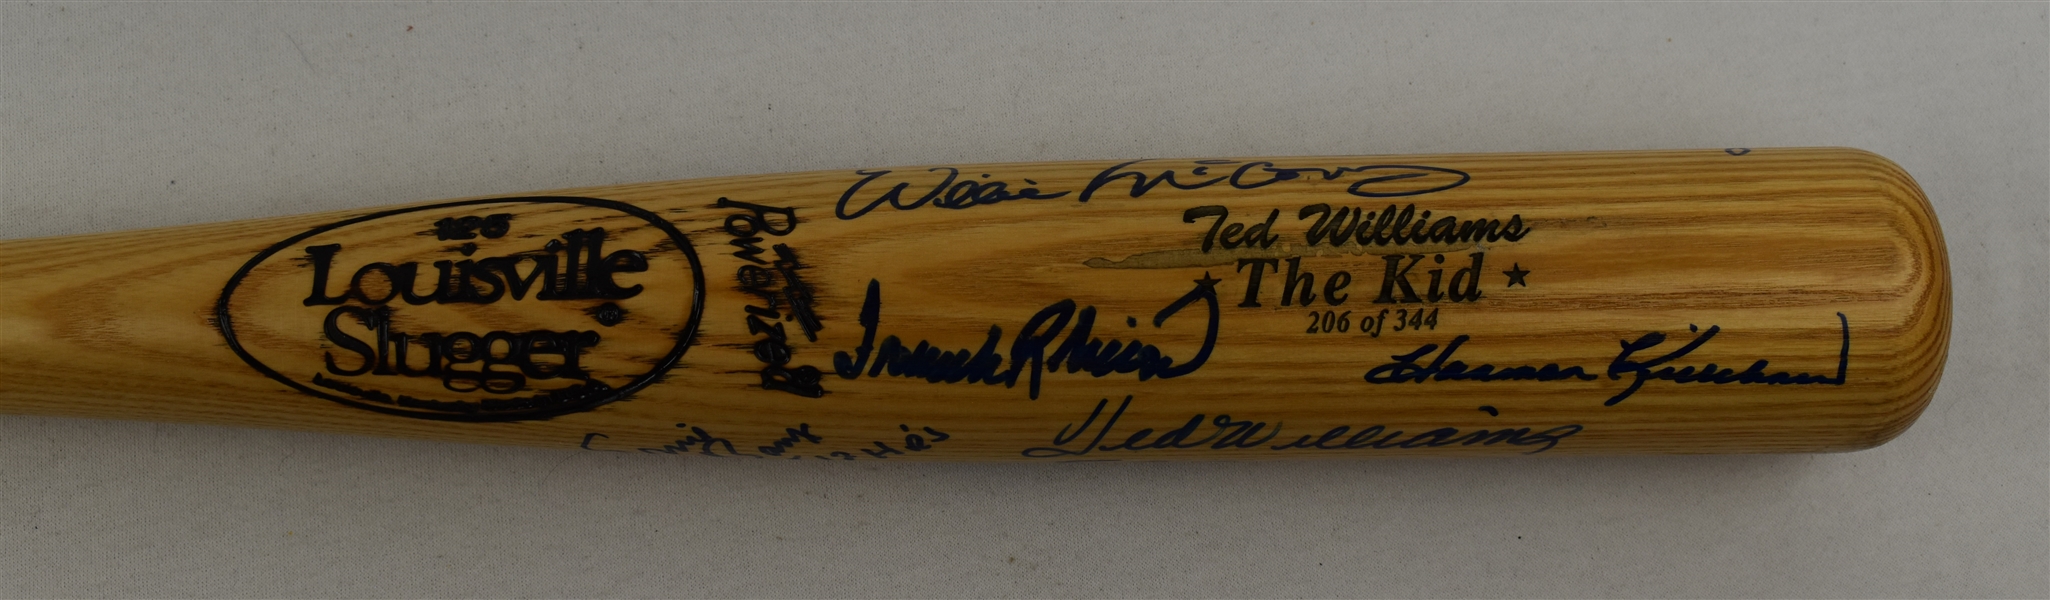 500 Home Run Club Autographed Bat w/Ted Williams 